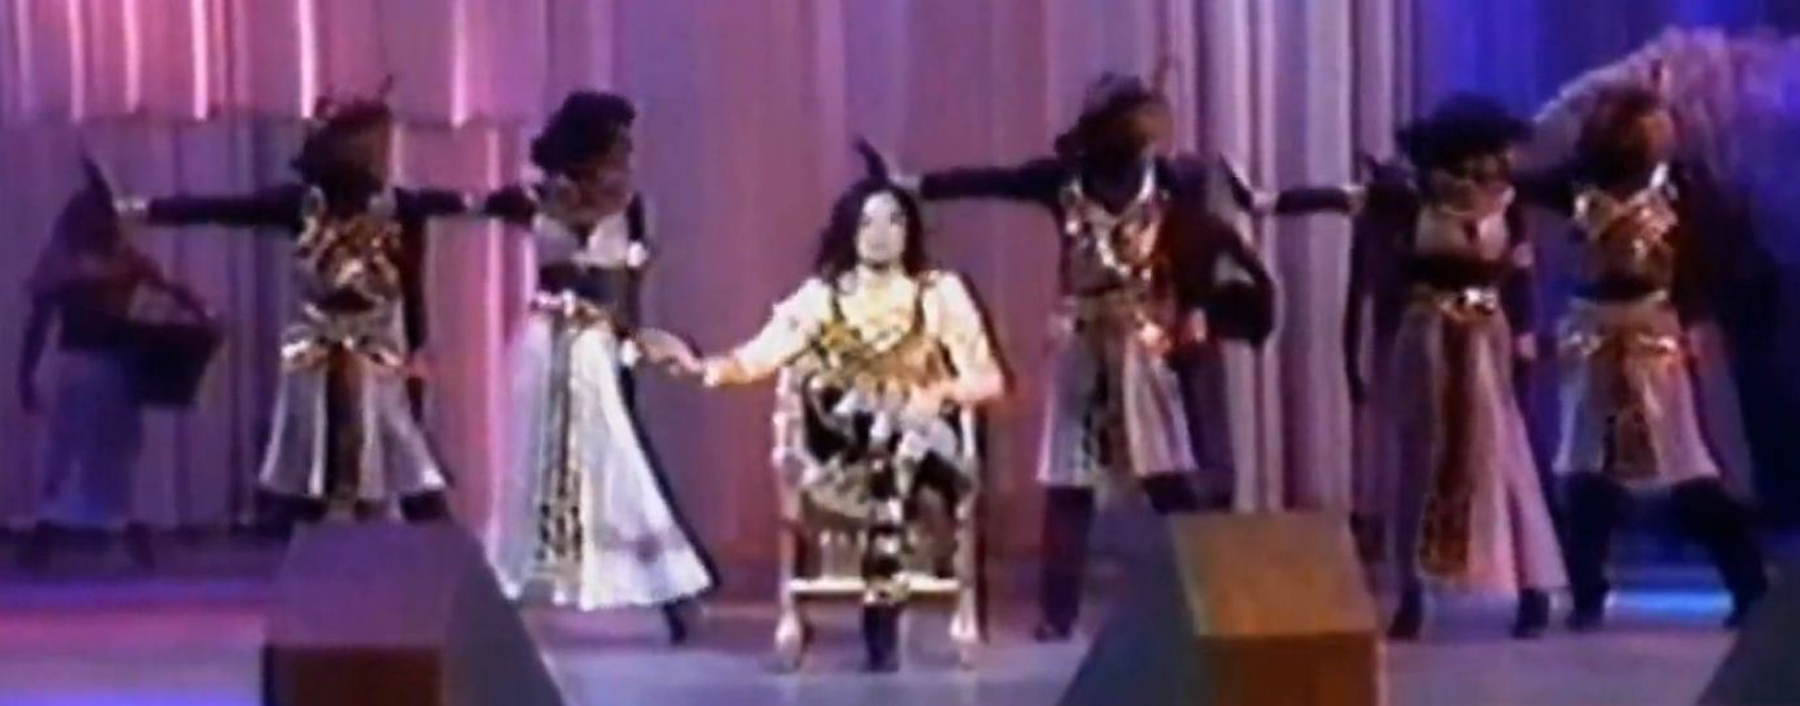 MICHAEL JACKSON: "REMEMBER THE TIME" COSTUMES  A group of costumes worn for the performance of - Image 15 of 16